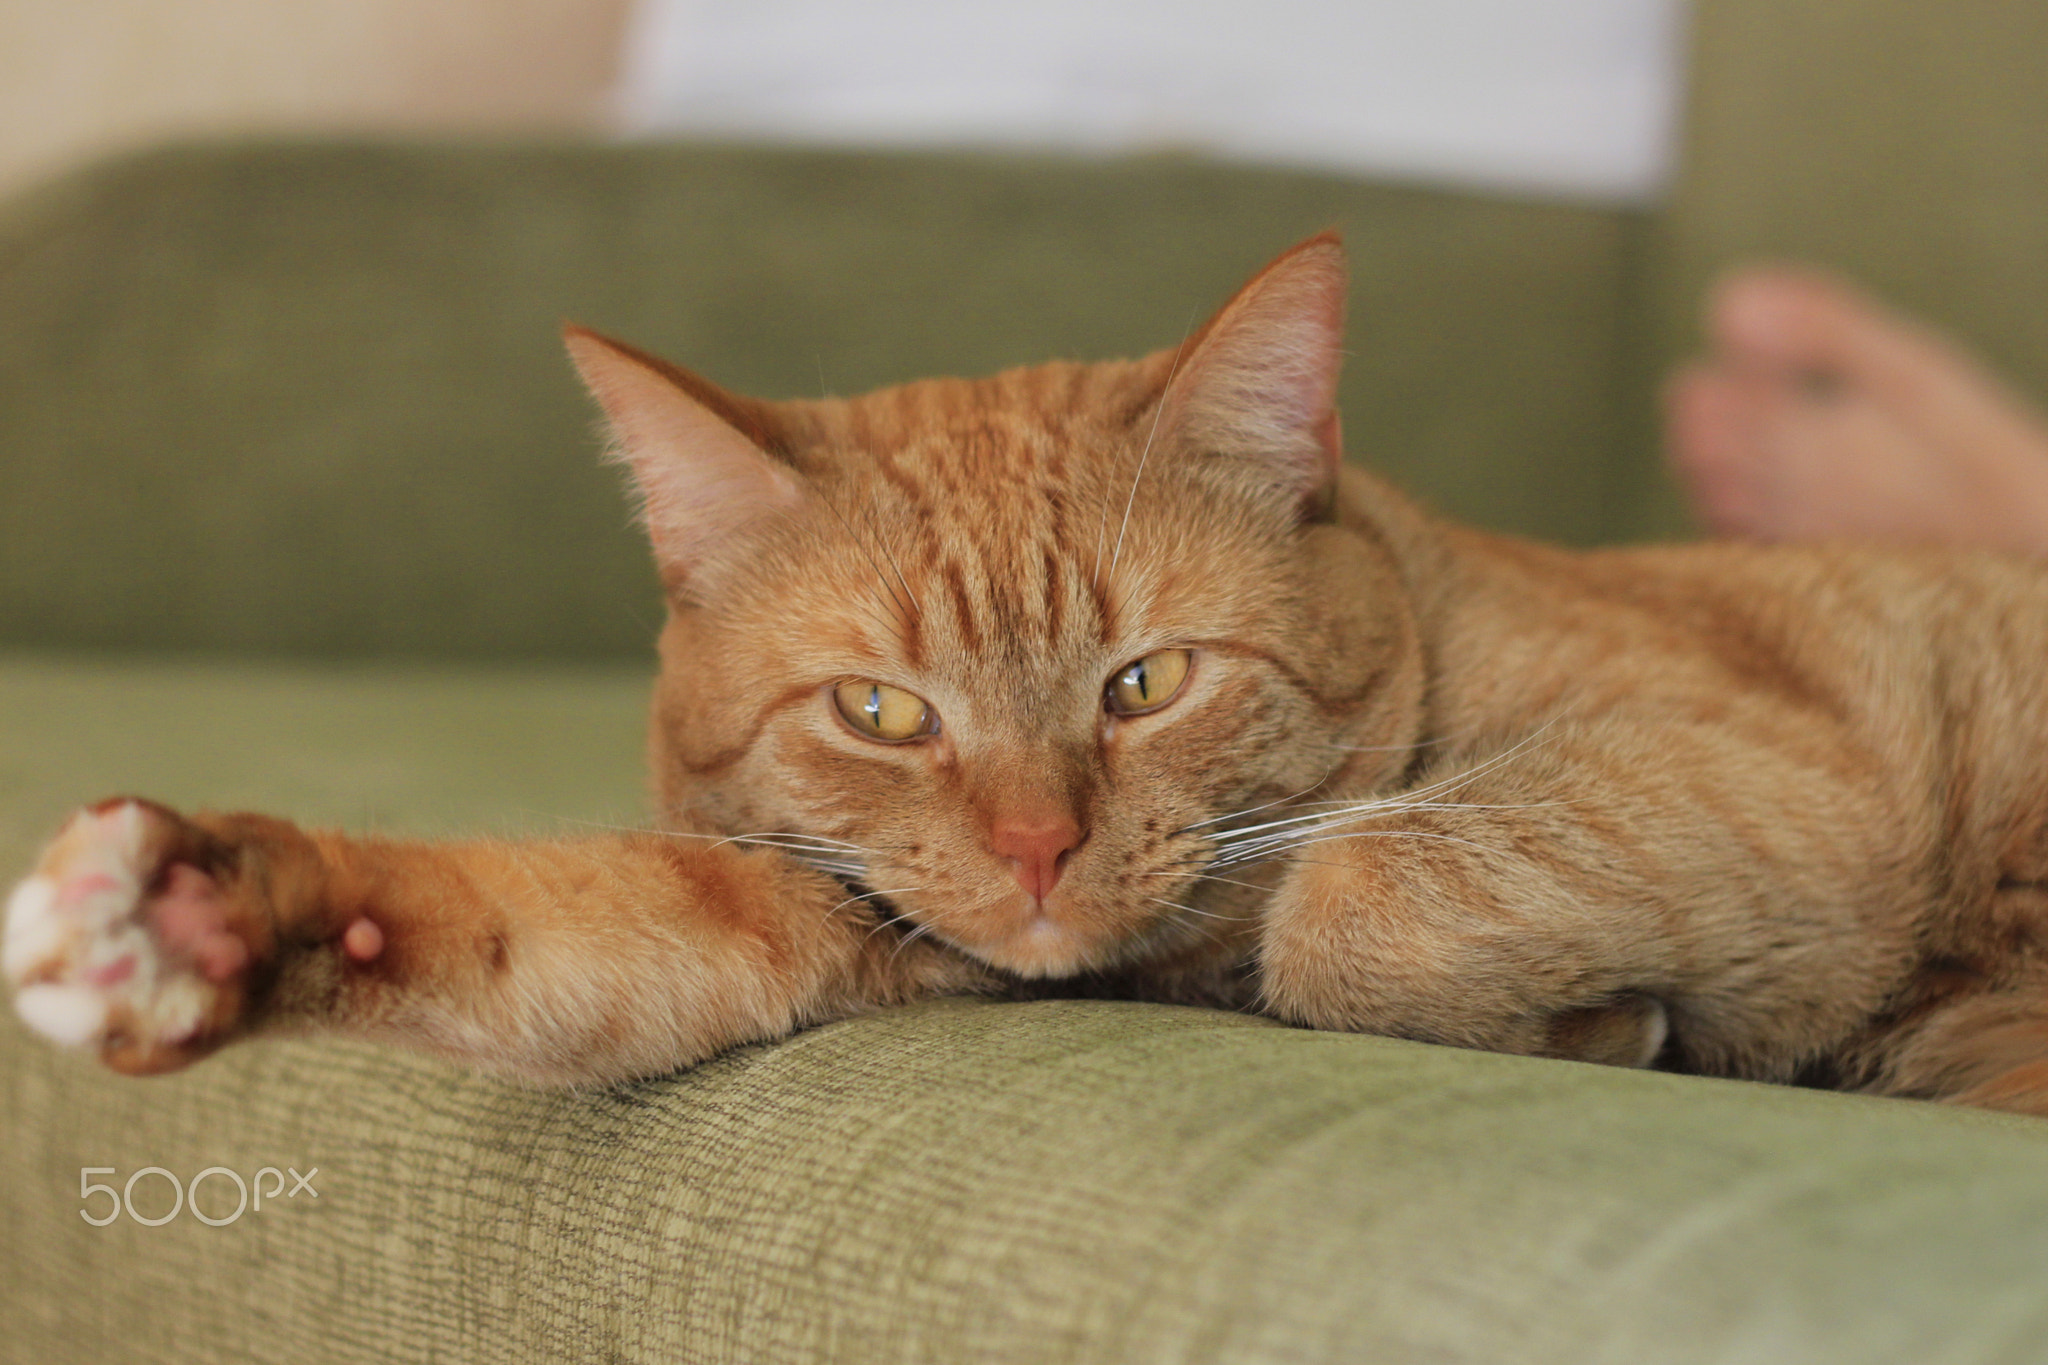 A big red cat is lying on a green sofa.